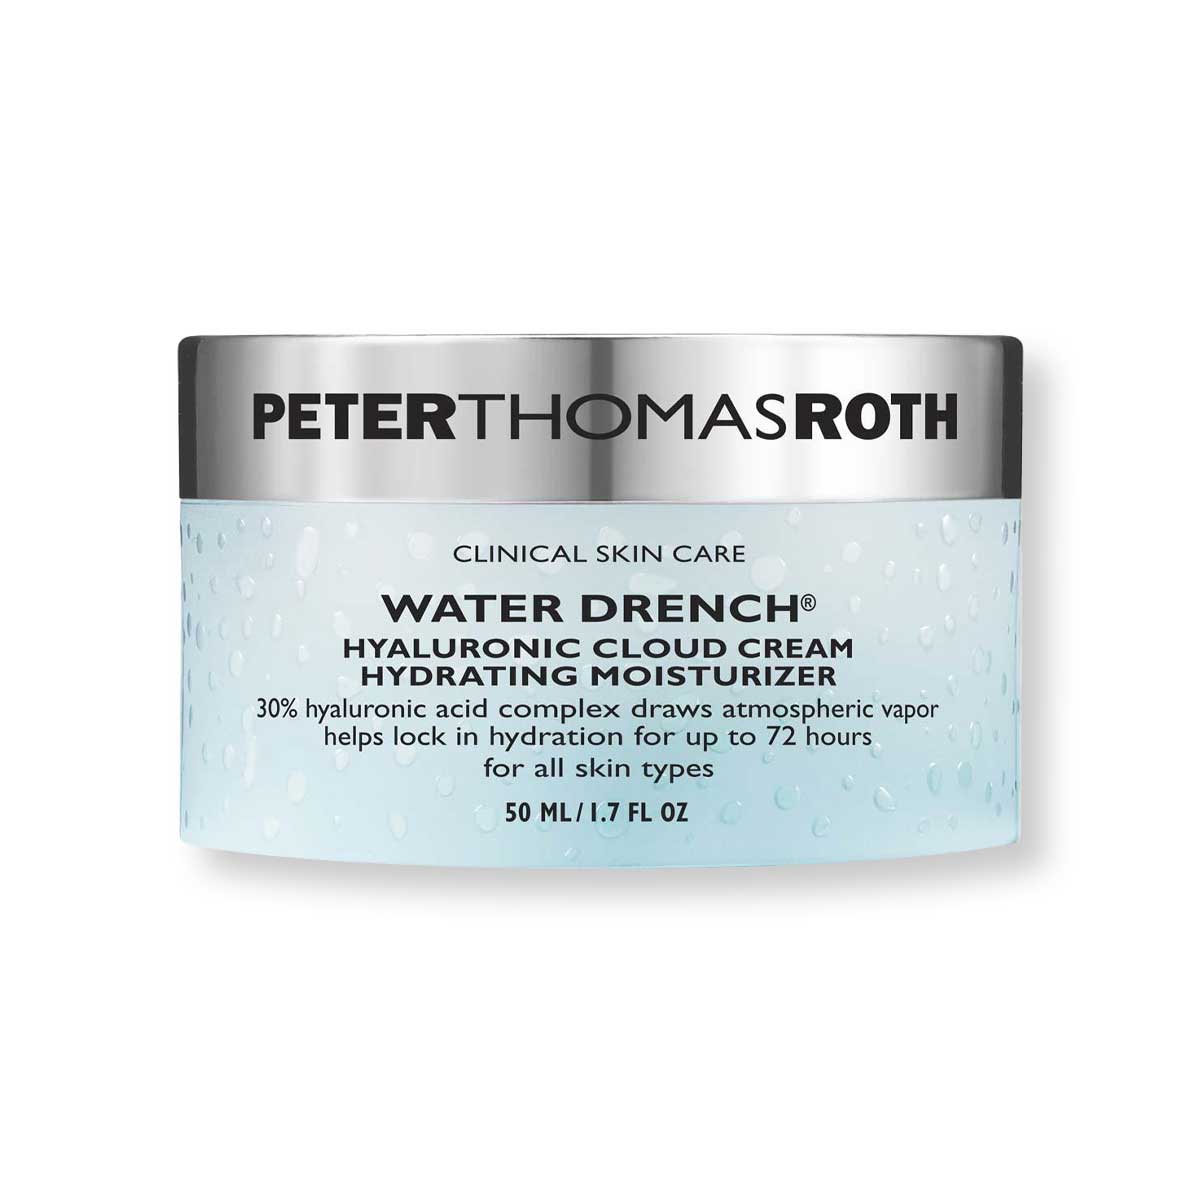 Water Drench® Hyaluronic Cloud